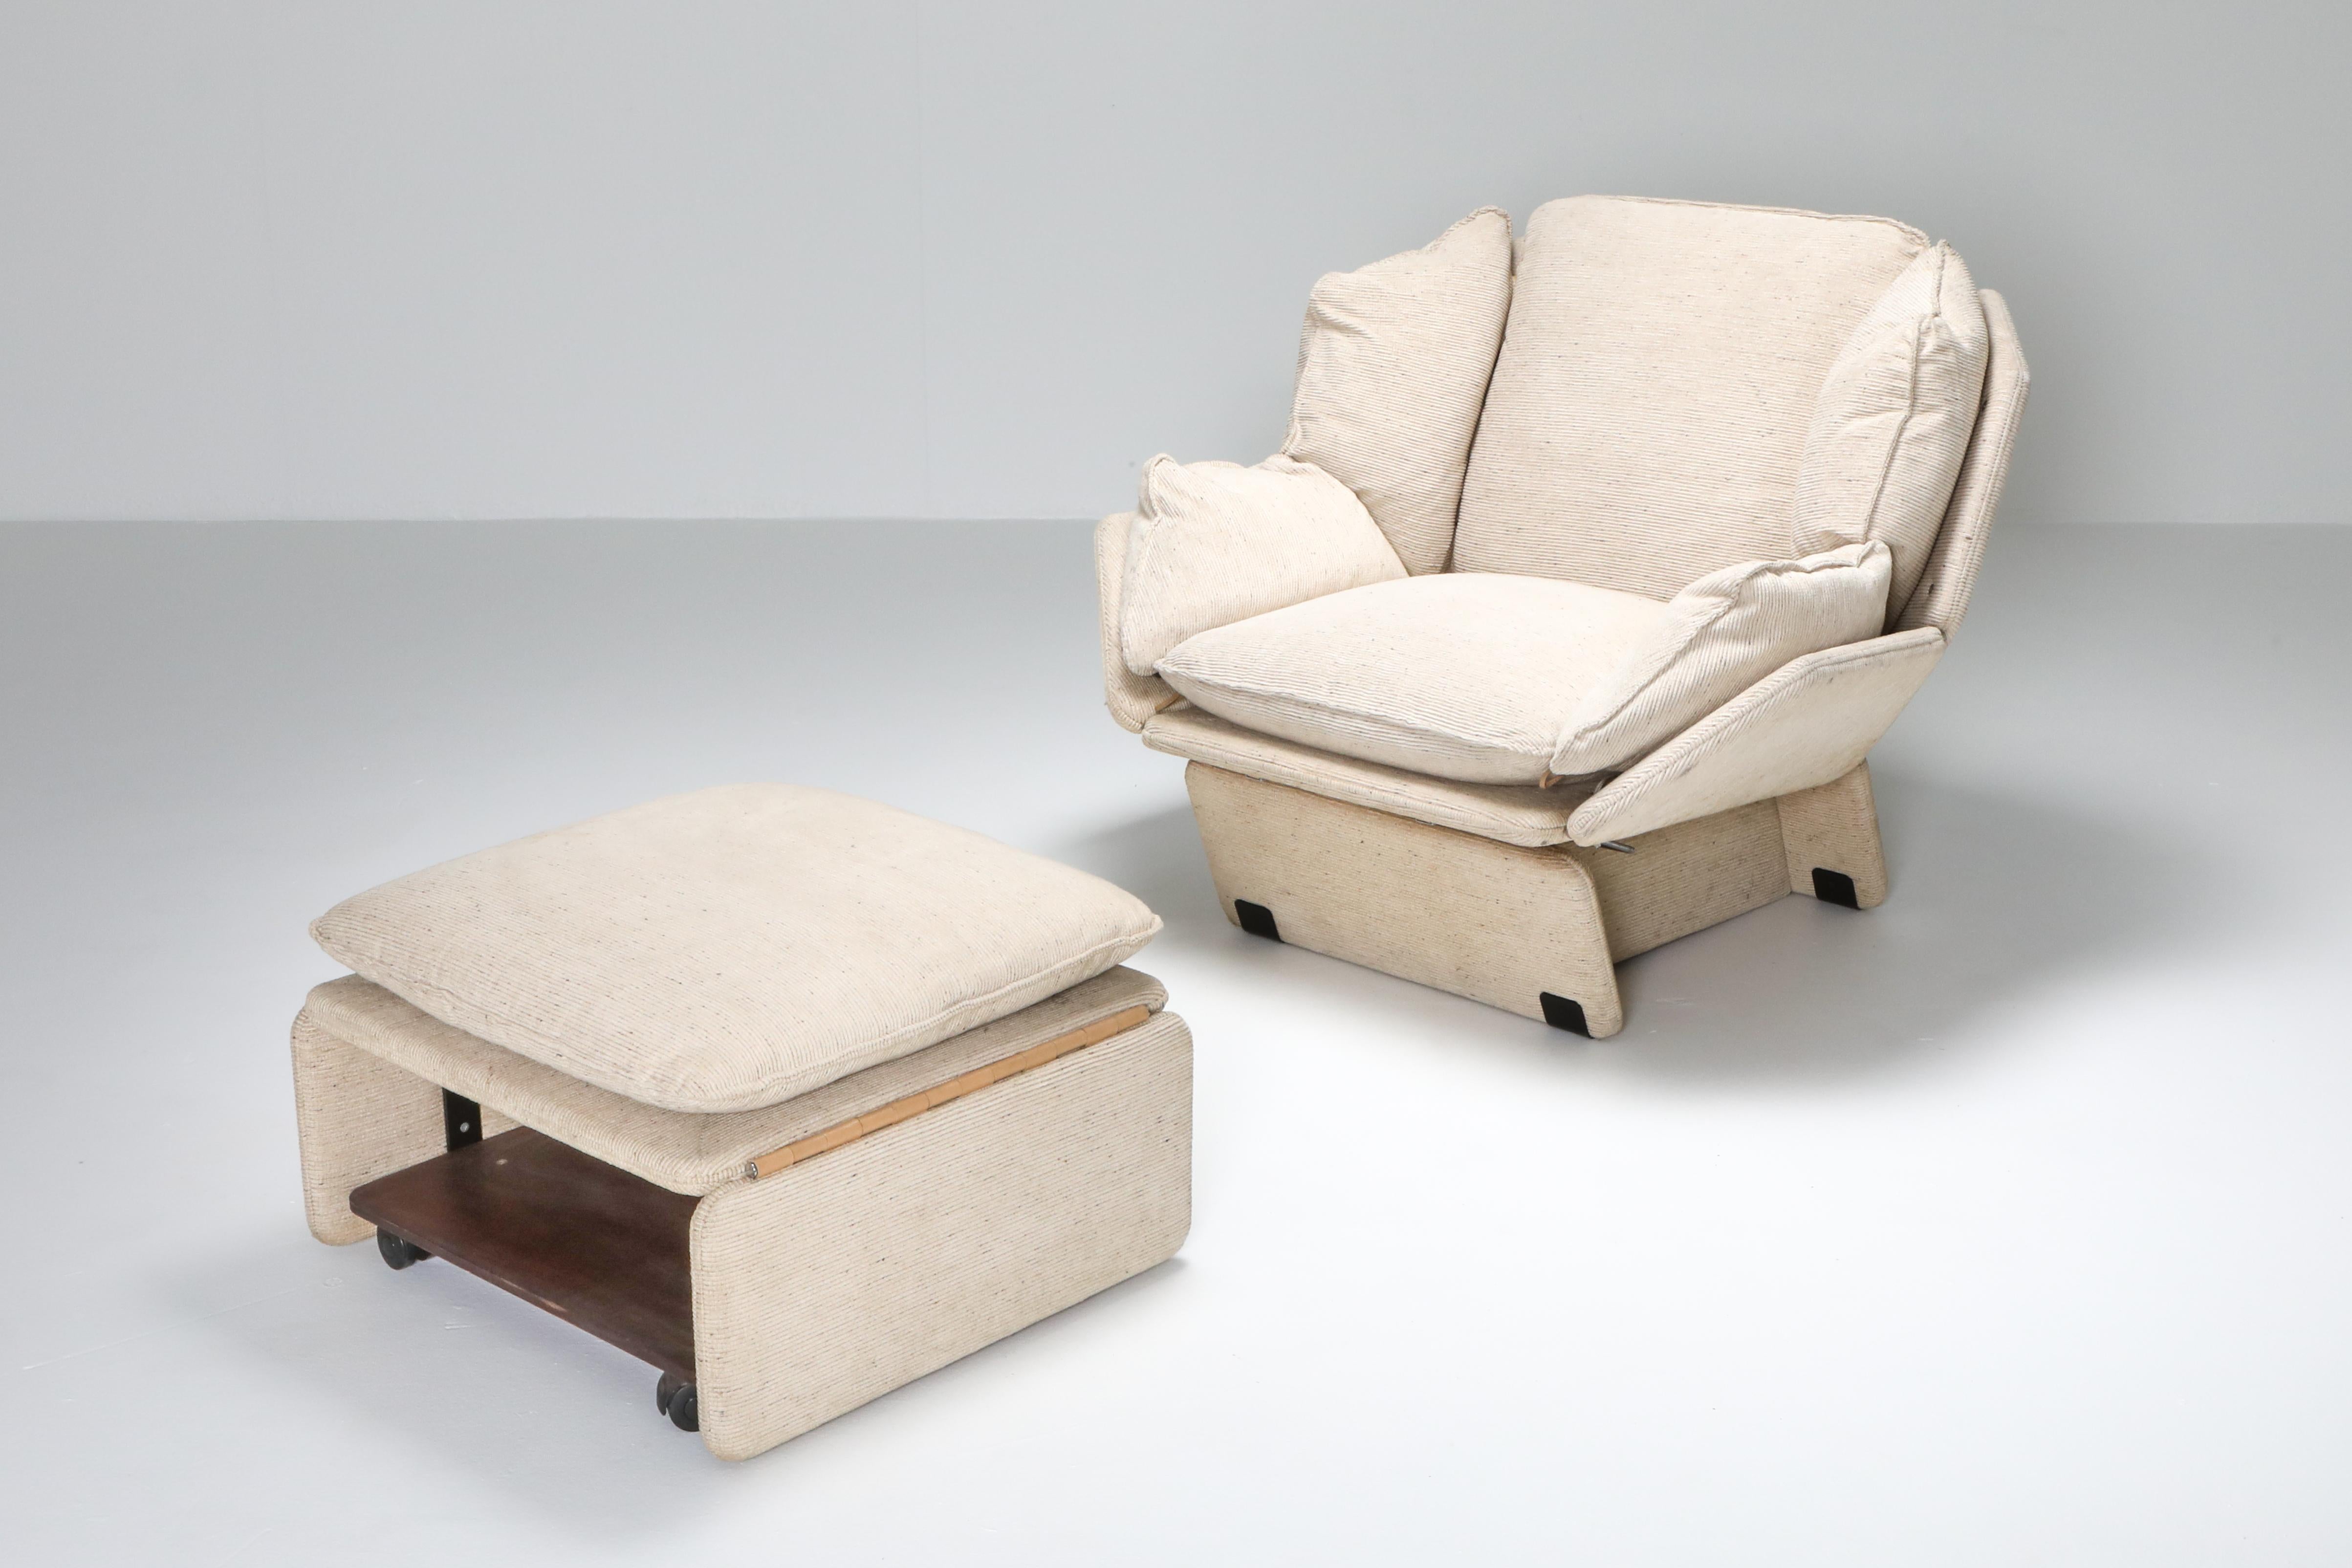 Postmodern lounge chairs with ottoman, Saporiti, Italy, 1970s

The most comfortable easy chair you might ever sit in.
Unusual lounge chair who'd fit perfectly with the architectural John Lautner Goldstein house.
The lounge chair has a reclining